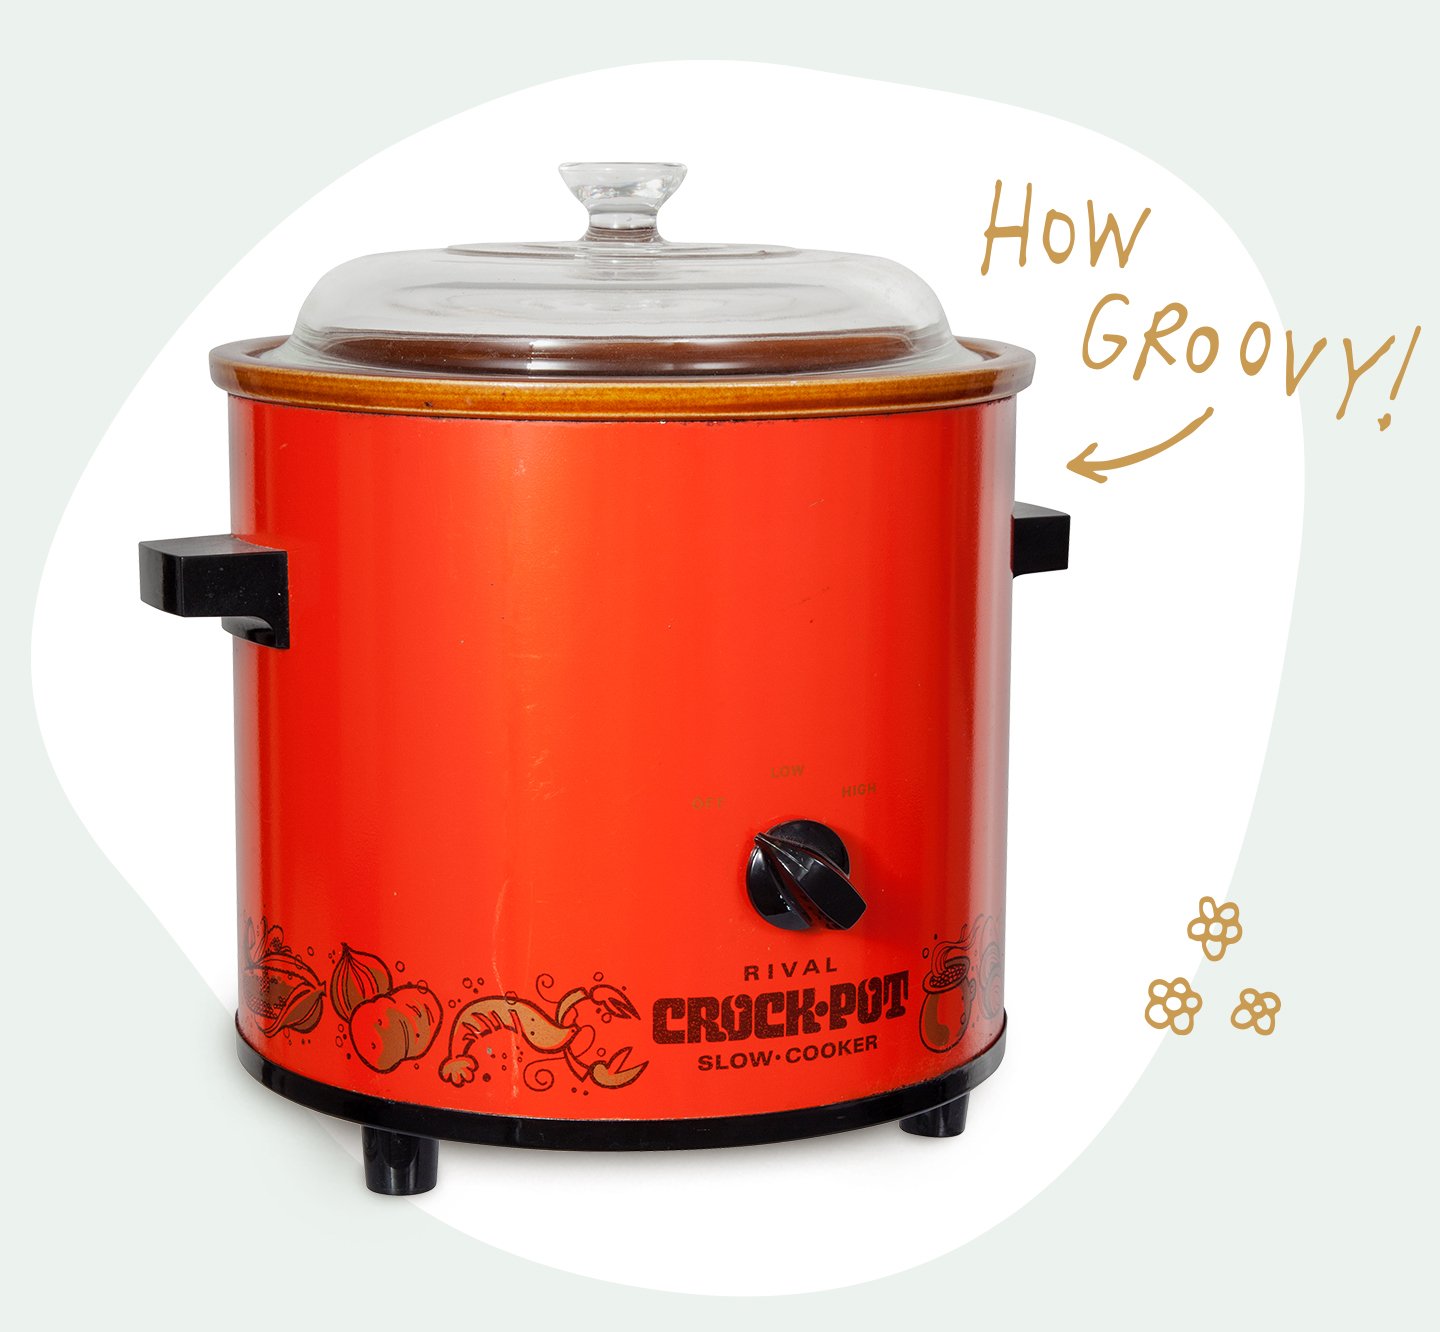 how groovy 19 70s slow cooker